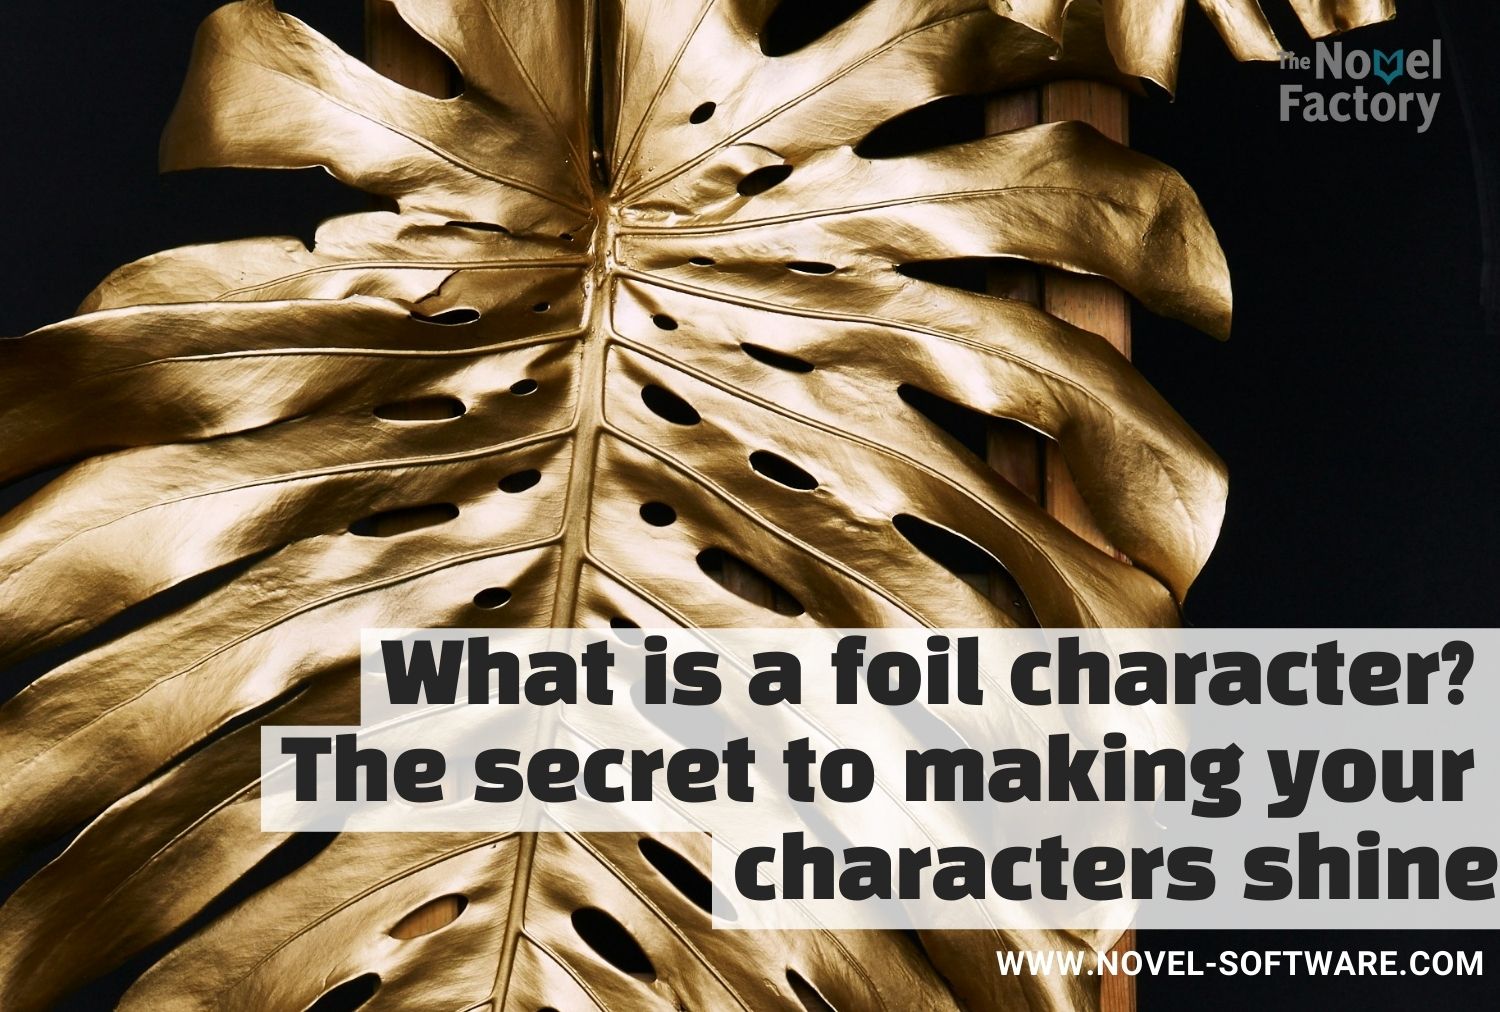 What is a Foil Character